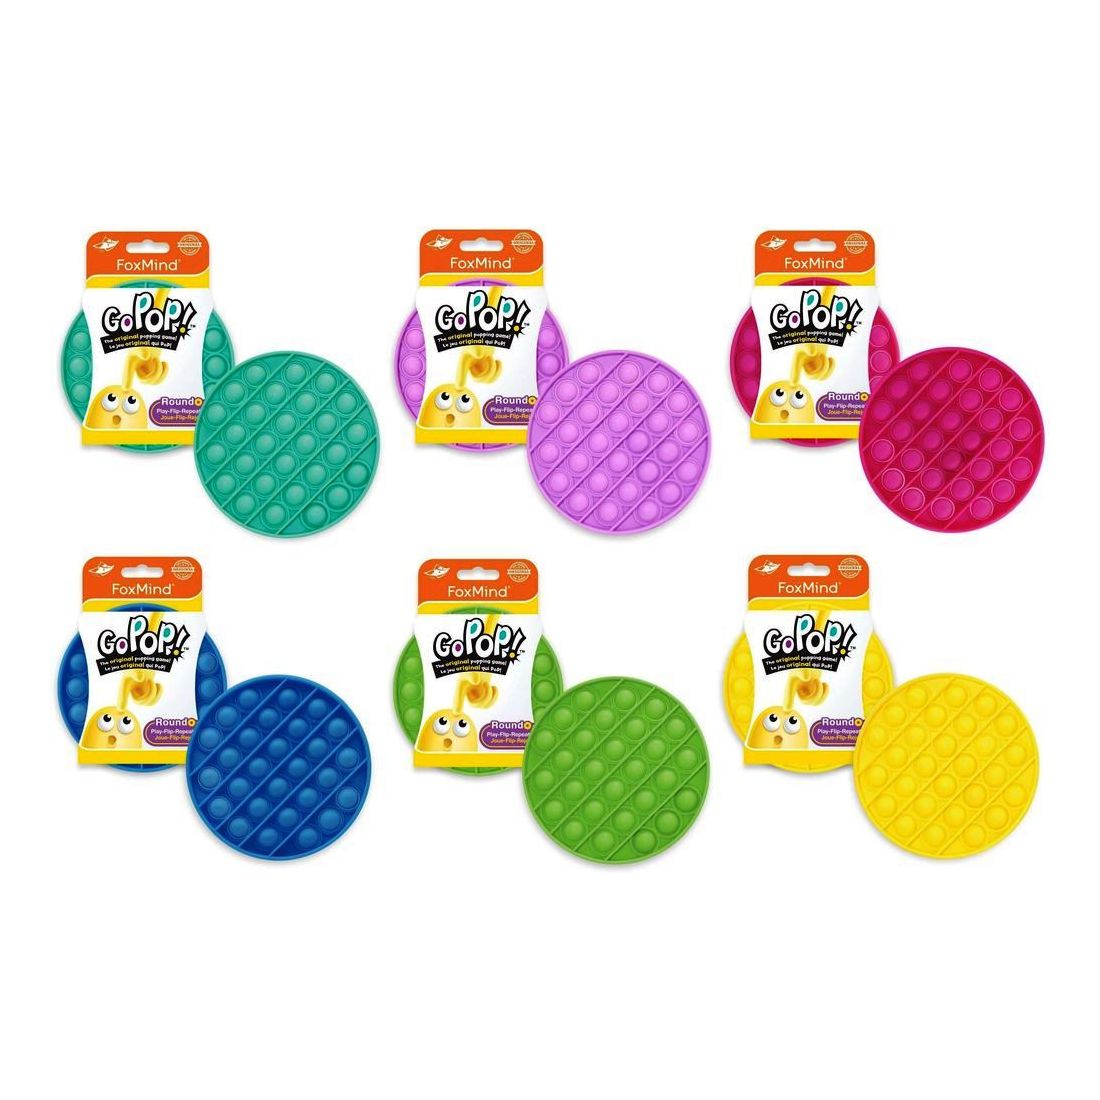 Foxmind Games Go Pop! Mini Roundo Popping Game (Assortment - Includes 1)